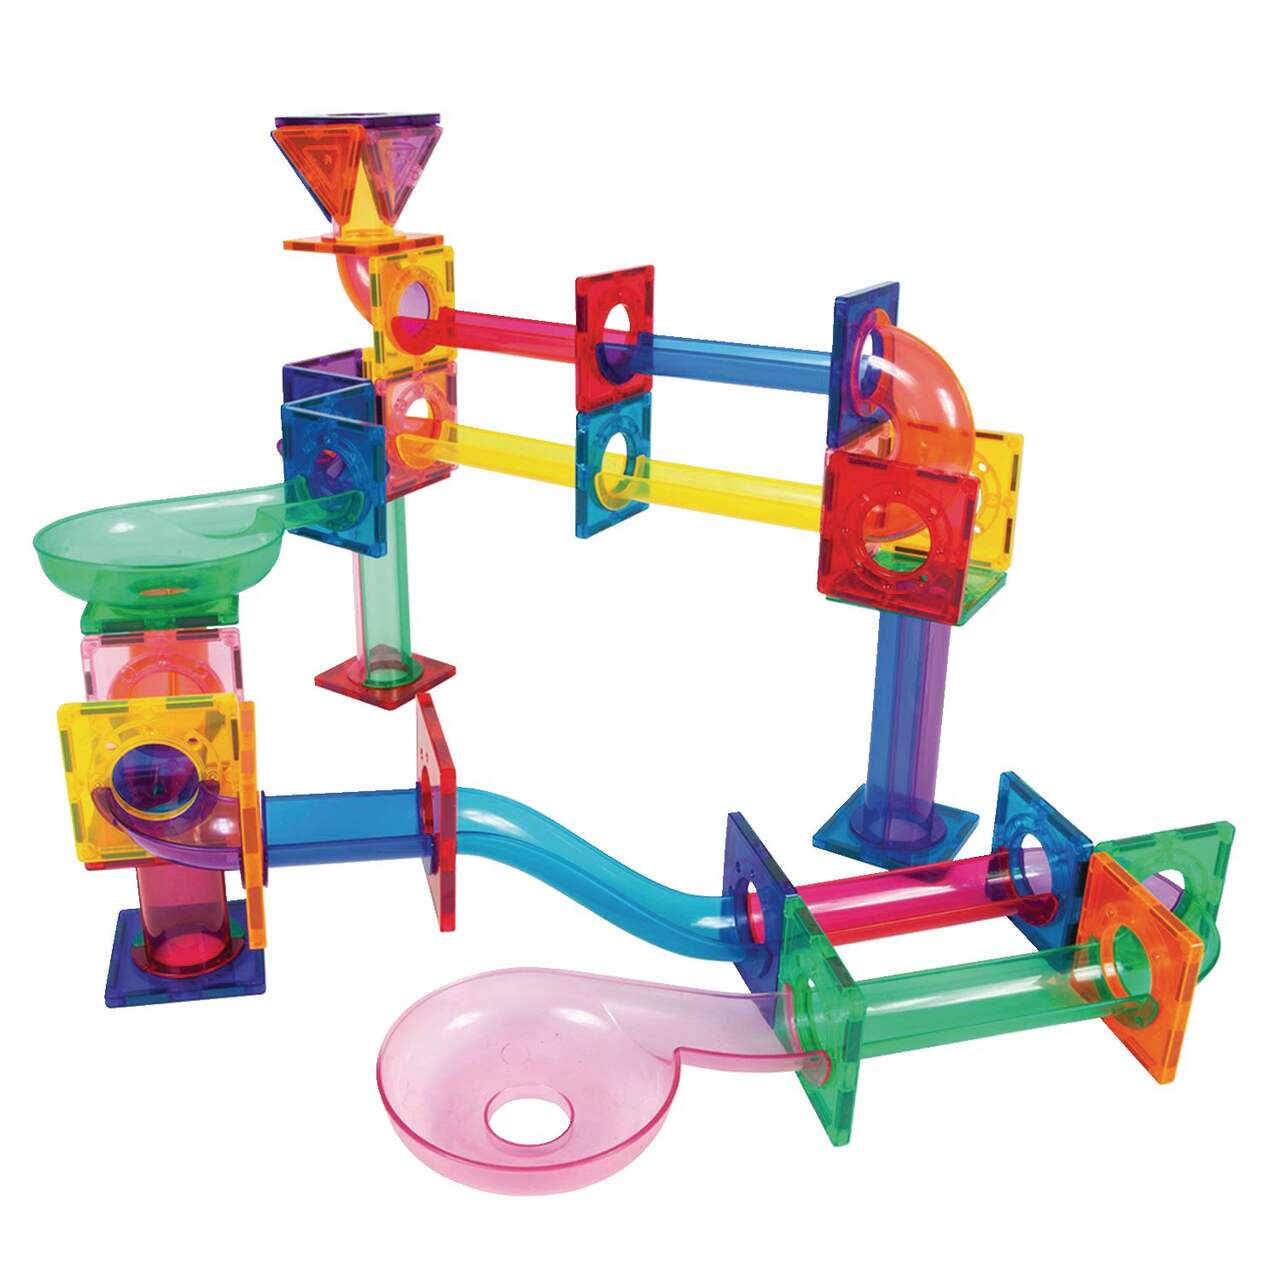 Picasso Tiles Magnetic Marble Run Building Blocks, 71-pc